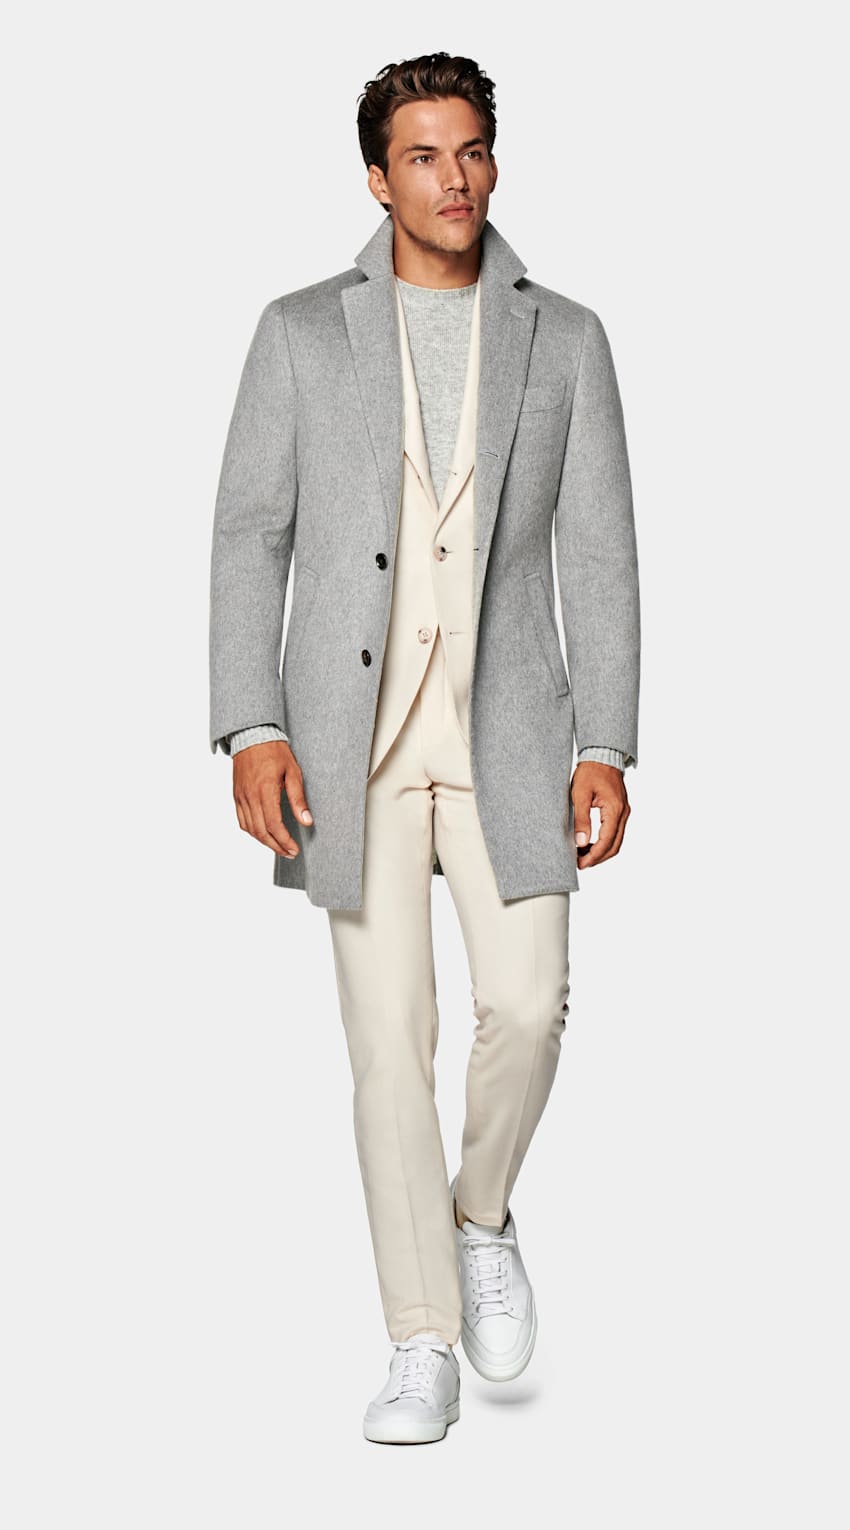 SUITSUPPLY Pure Circular Cashmere by Rogna, Italy Light Grey Overcoat